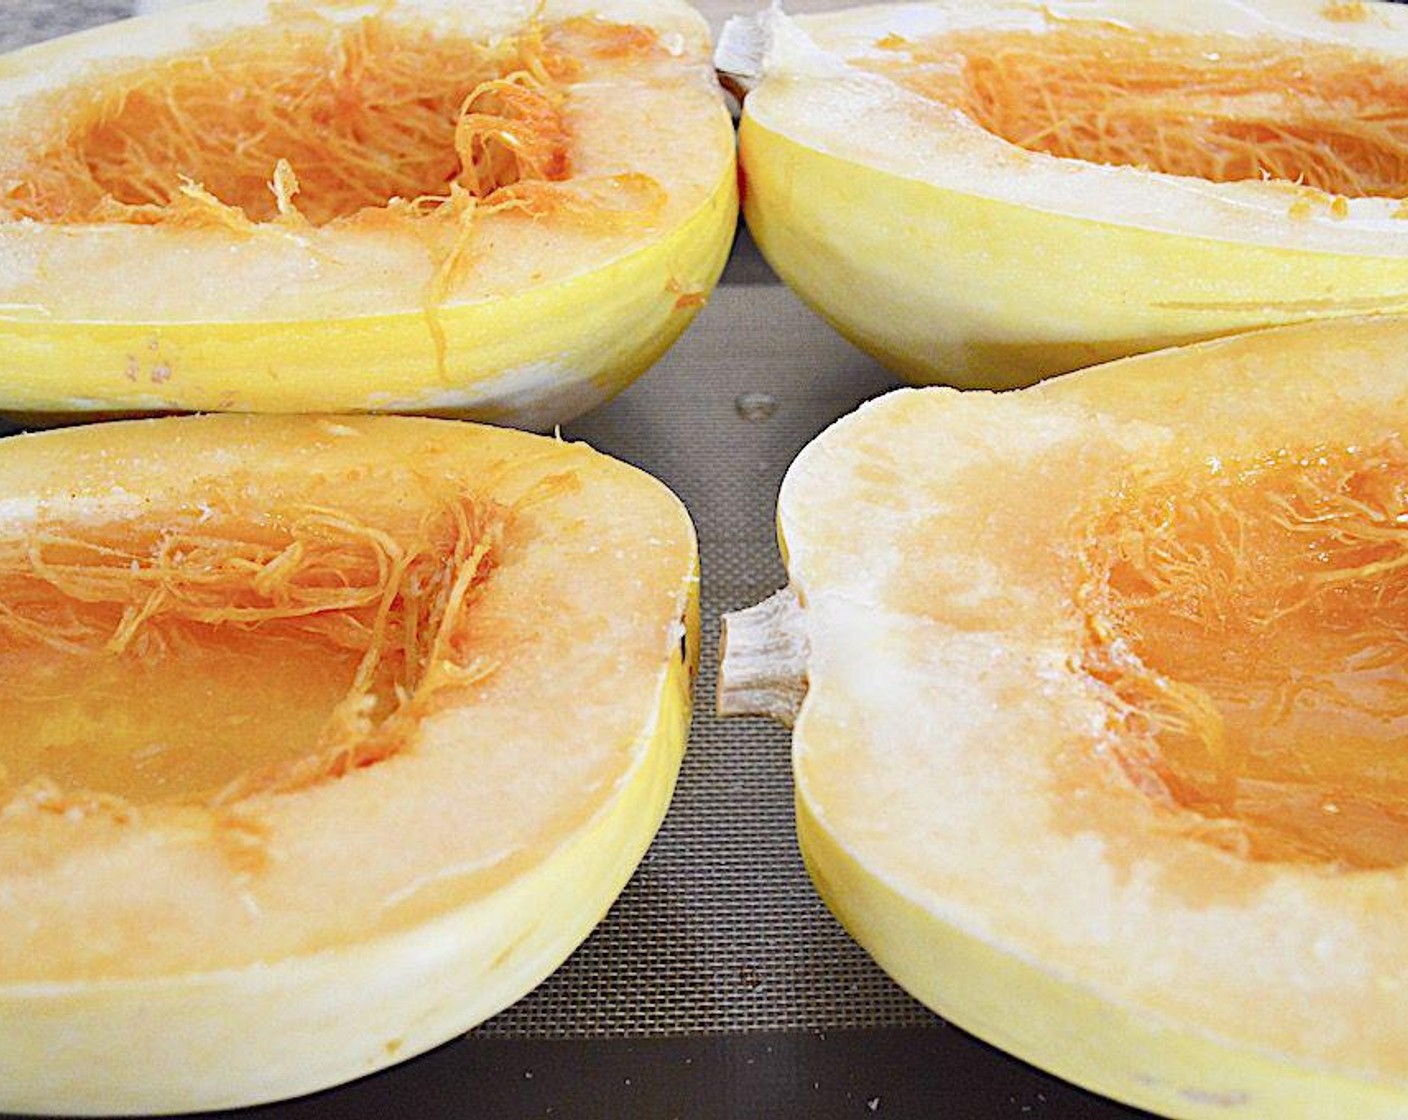 step 2 Cut the spaghetti squash in half lengthwise and scrape out all of the seeds from each half. Lay them out on the sheet tray and drizzle each of them generously with Olive Oil (as needed). Then sprinkle them all generously with the Salt (to taste) and McCormick® Garlic Powder (to taste). Get them into the oven for 45-50 minutes, until completely tender.